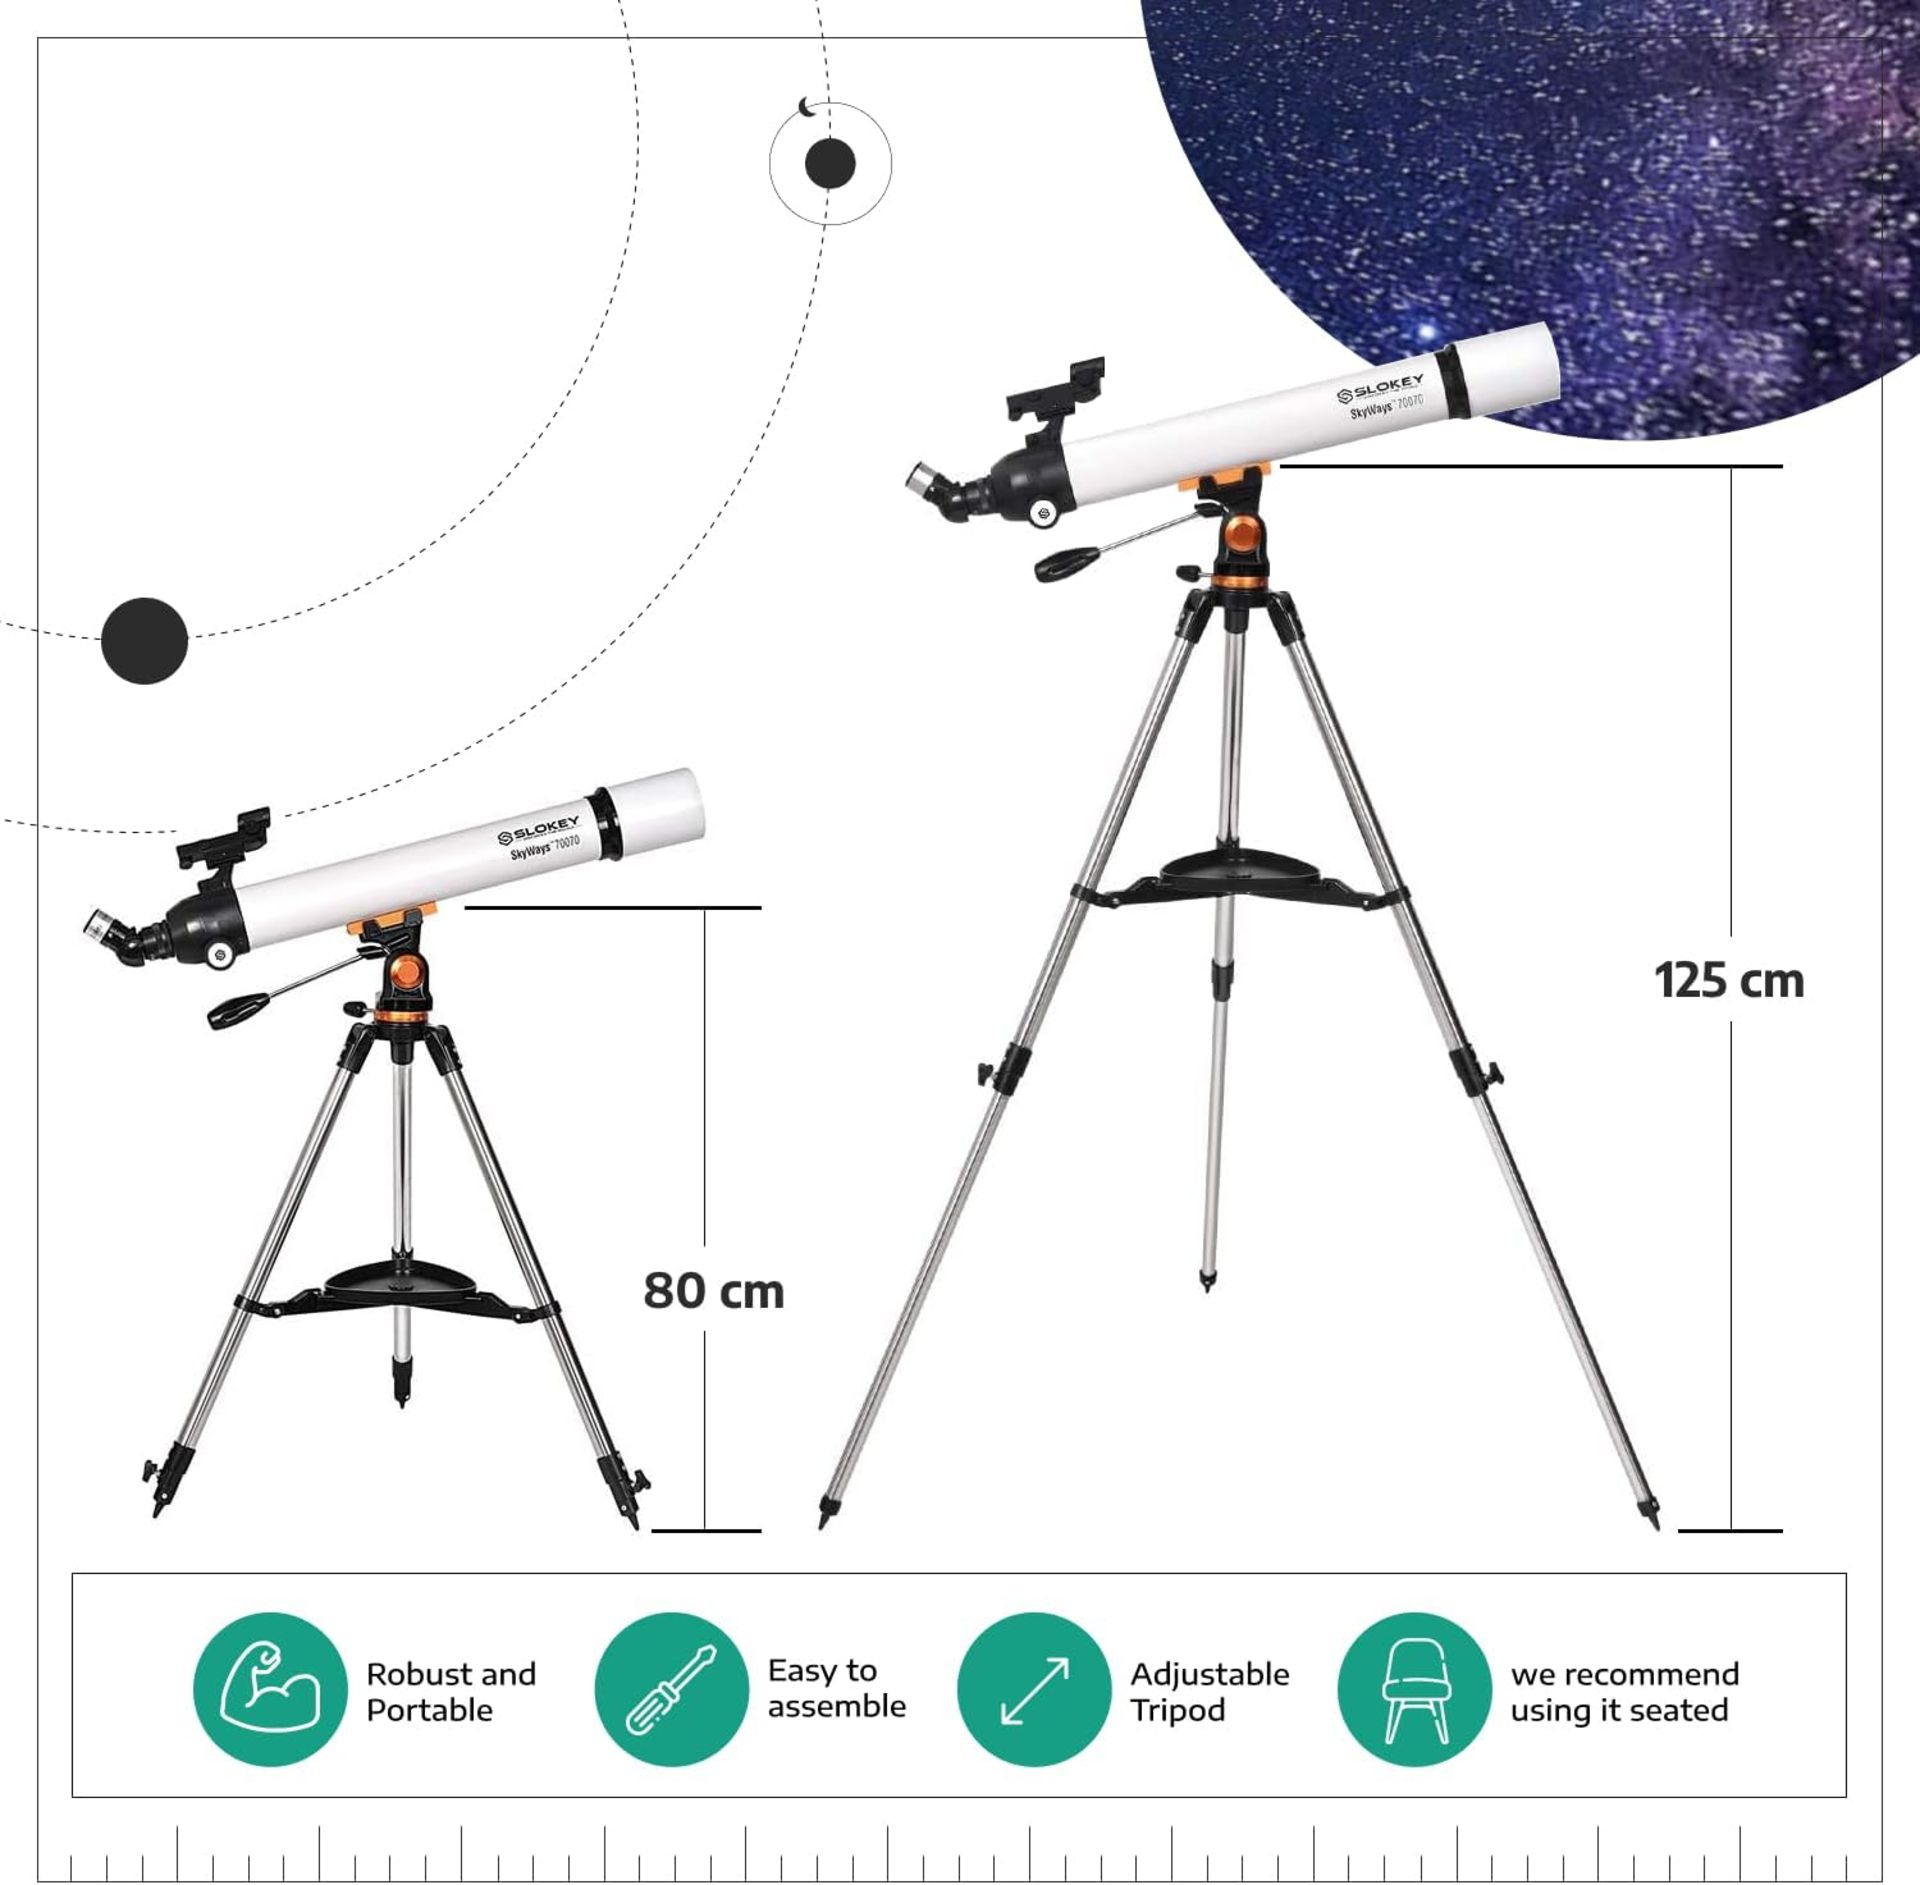 Slokey 70070 SKYWAYS TELESCOPE FOR ASTRONOMY WITH ACCESSORIES (NEW) - AMAZON RRP Â£159.99 - Image 6 of 10